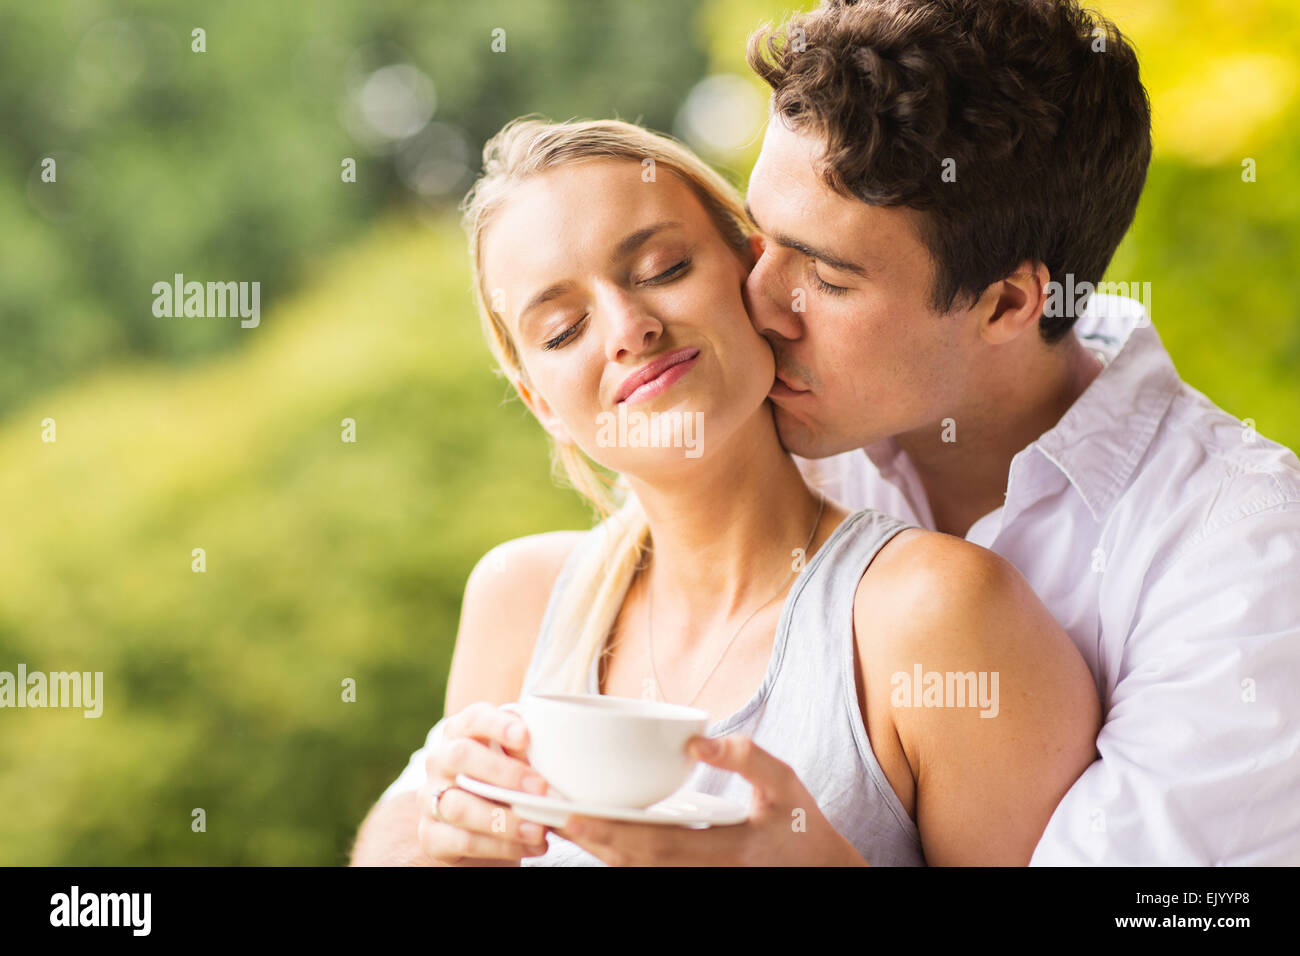 Handsome Husband Kissing Wife Outdoors Stock Photo Alamy